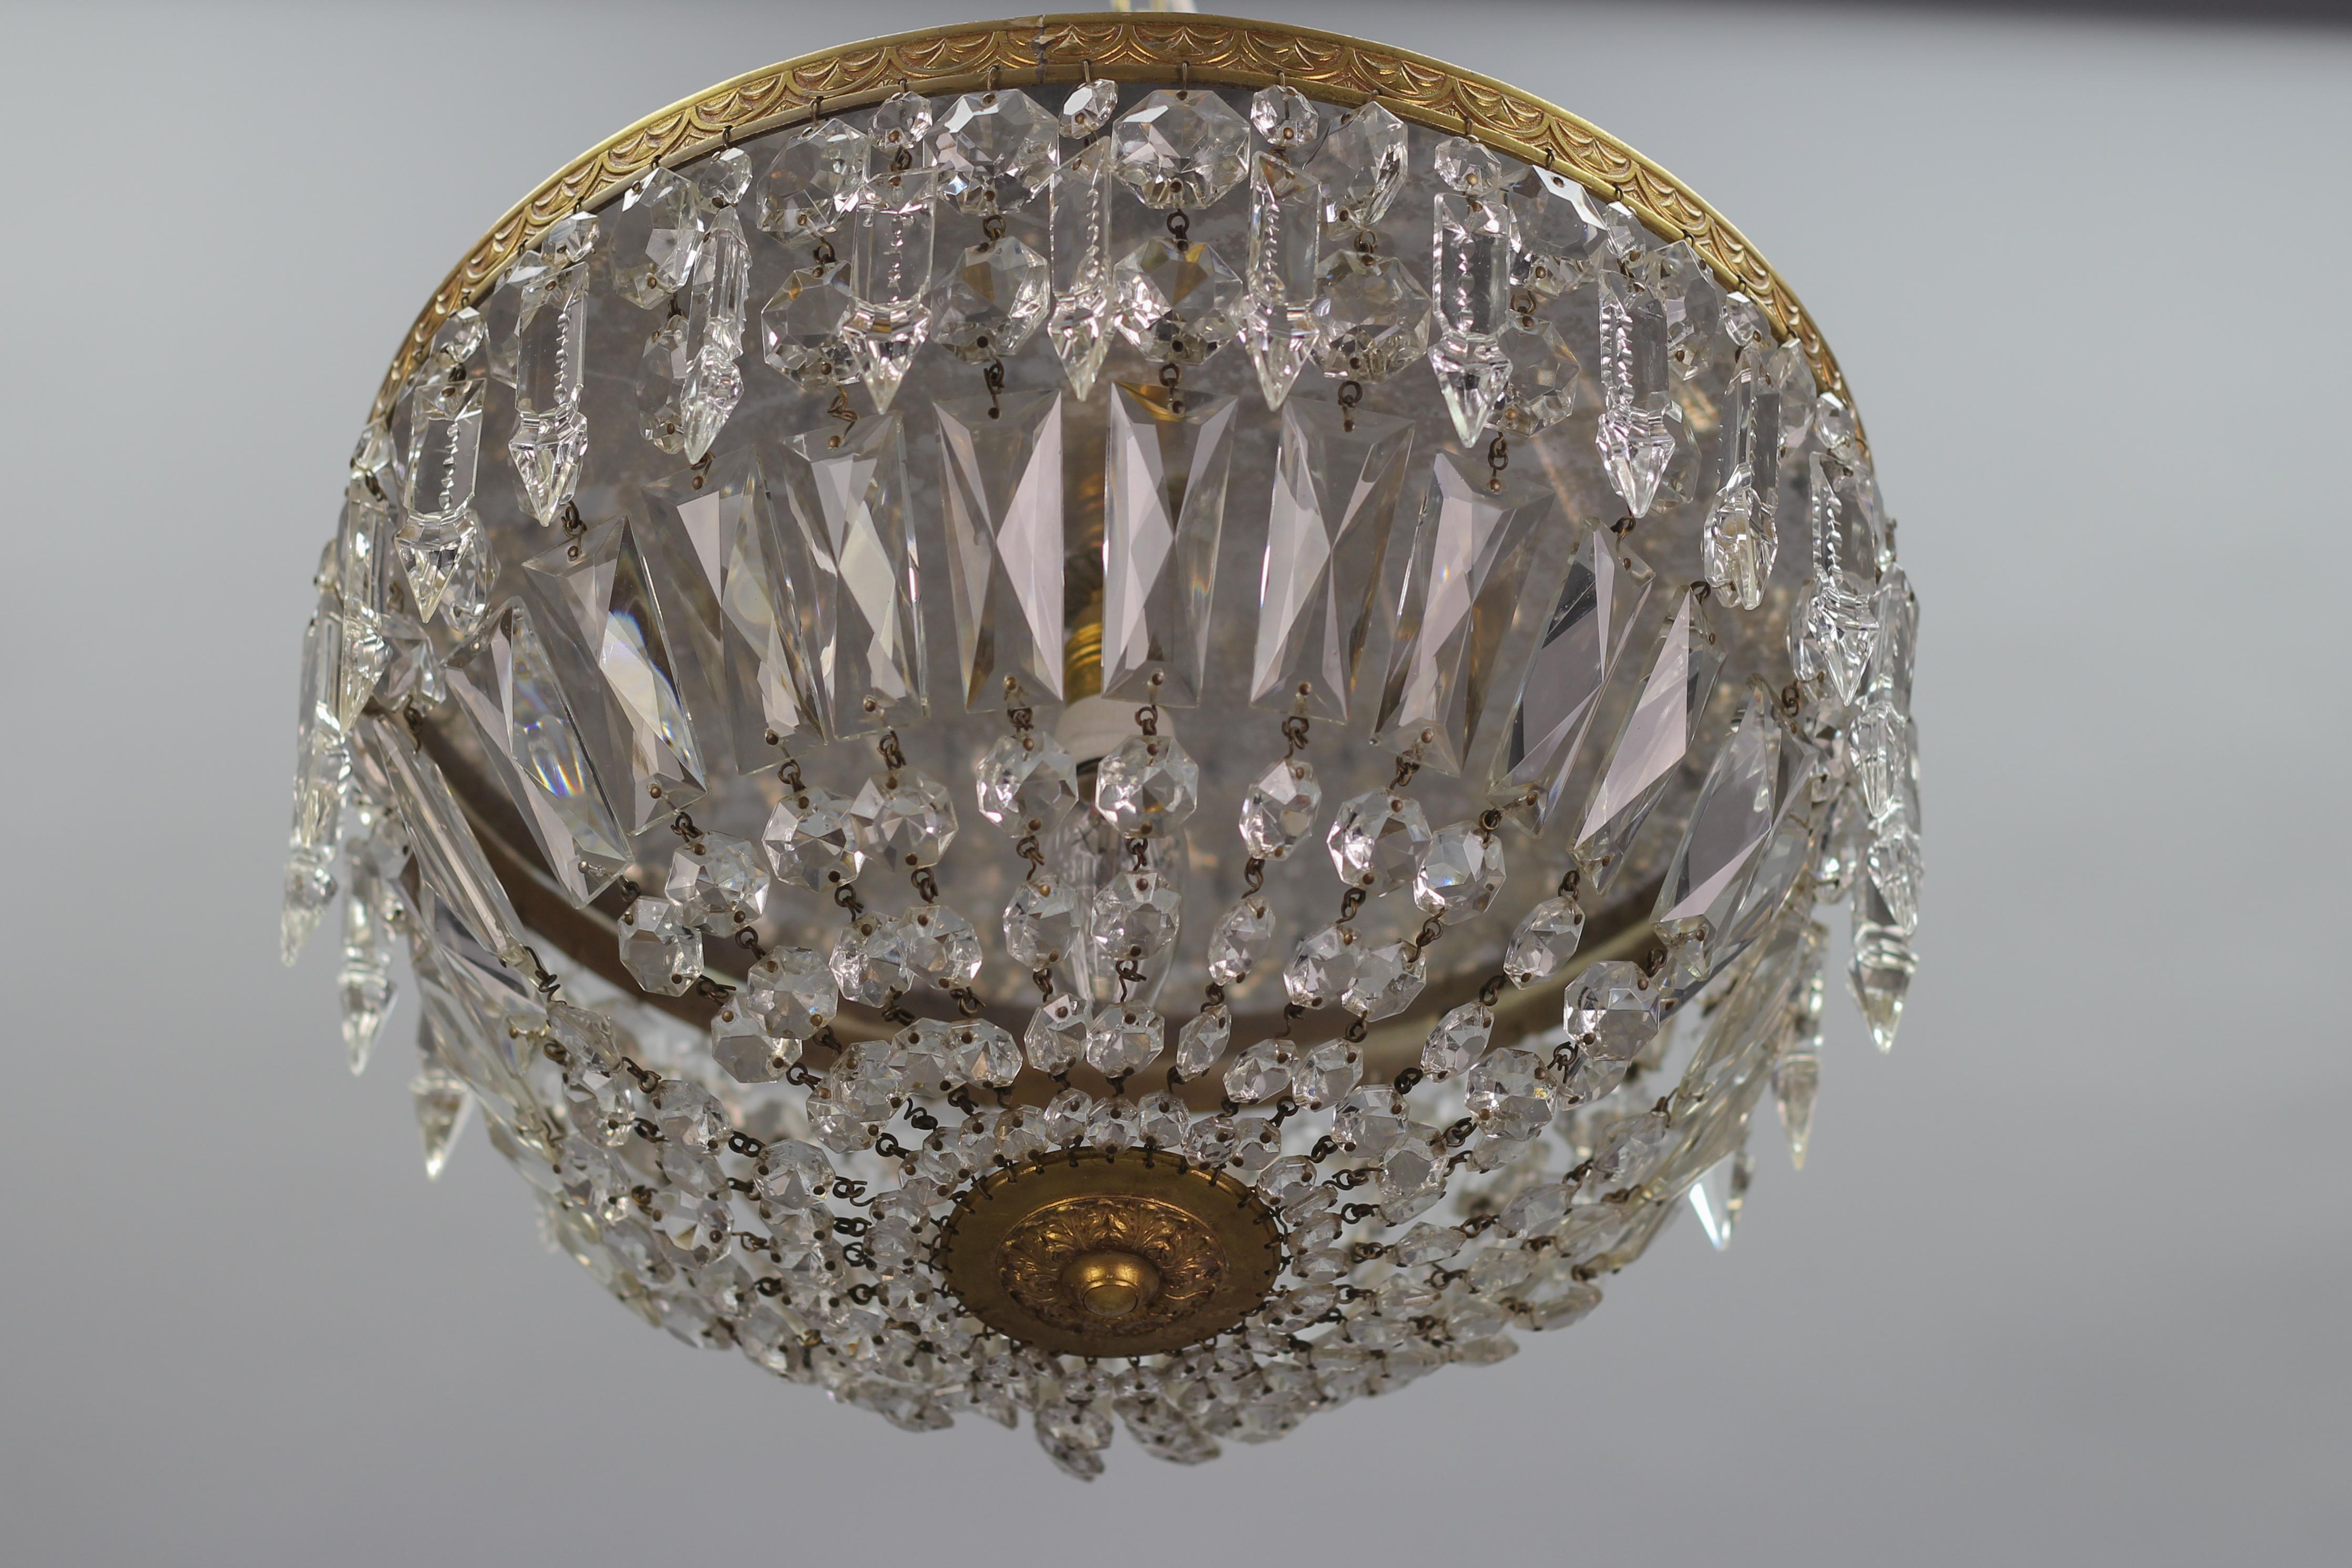 This wonderful Art Deco-style ceiling fixture features clear crystal glass prisms and beads mounted on an ornate brass outer ring, hung with zipper-cut crystal prisms, and centered with a brass finial.
One interior light - one socket for E14 size